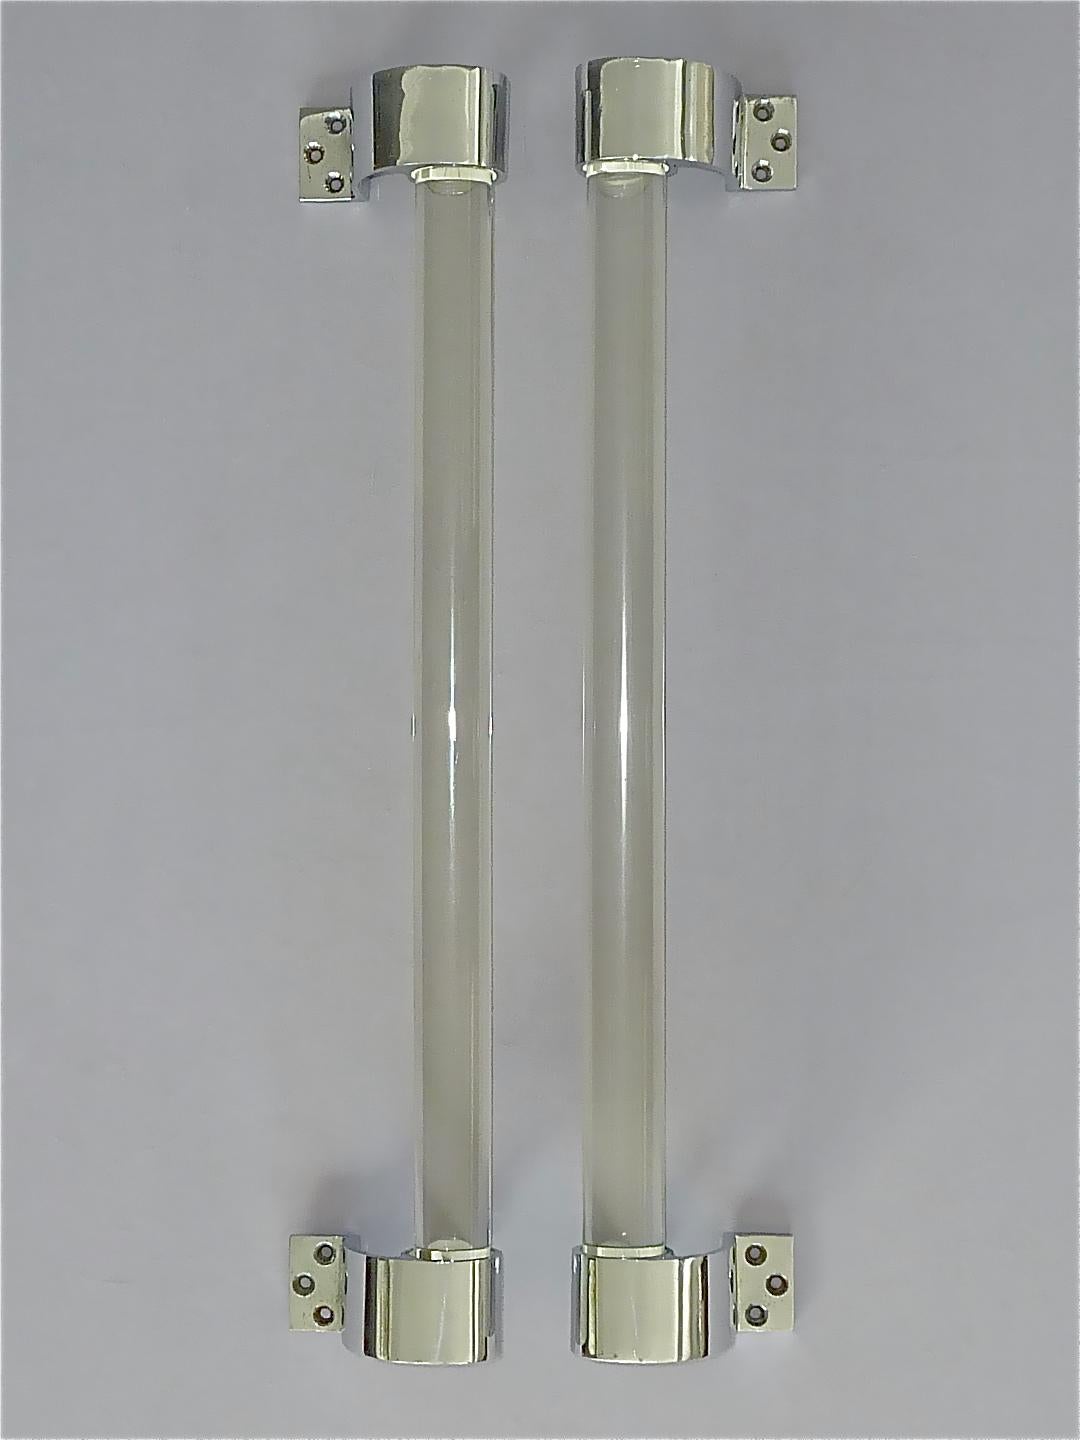 Beautiful pair of huge French modernist Art Deco door handles designed and executed in the 1920s to 1930s in France most probably by Jacques Adnet in cooperation with Baccarat France. Made of high quality the thick and heavy clear crystal glass rods